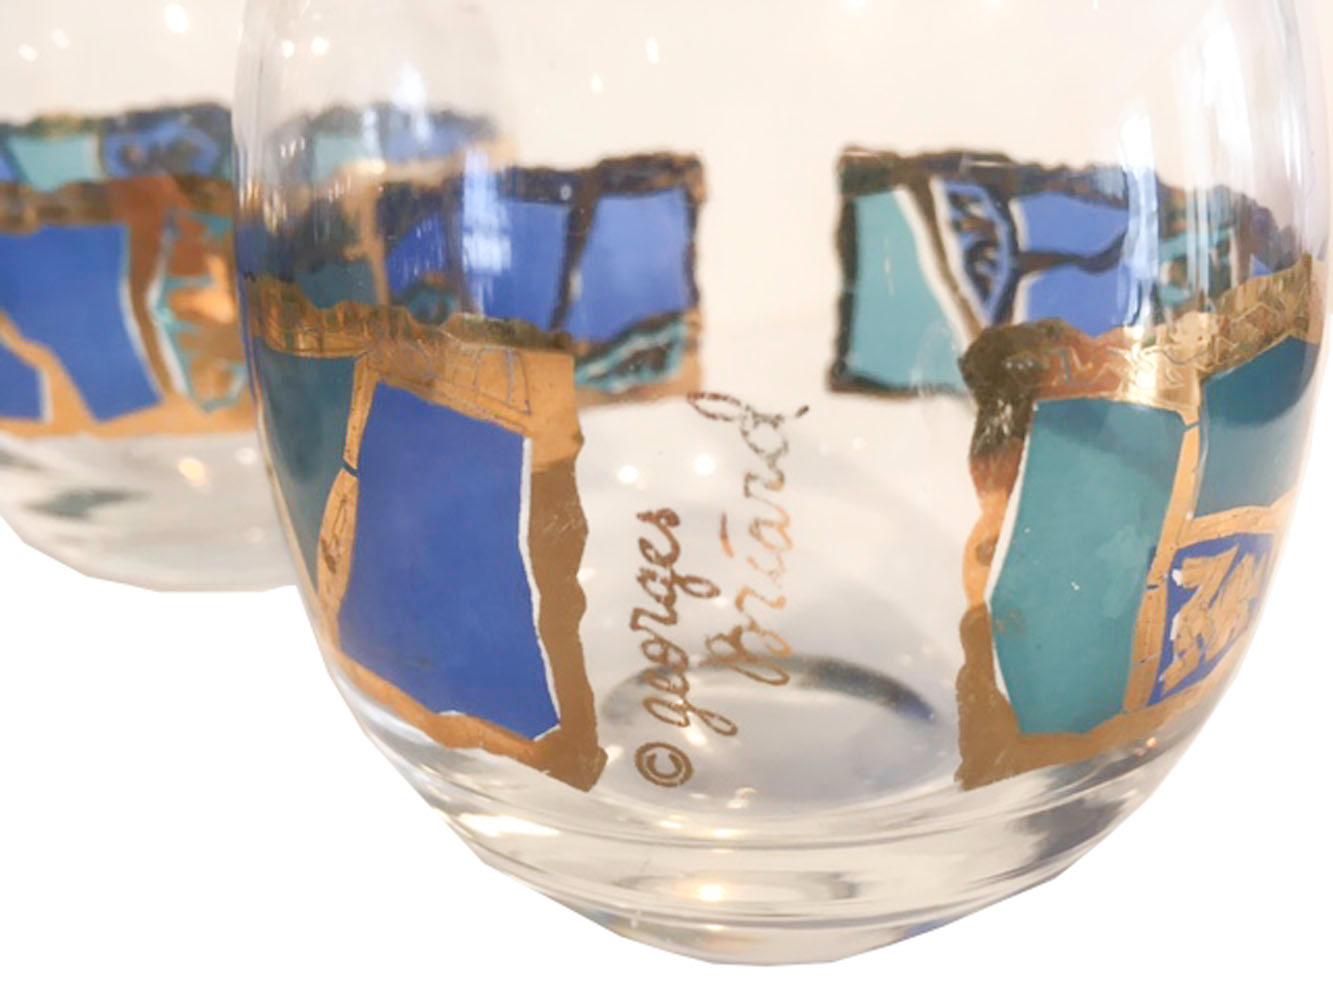 Set of 6 vintage roly poly cocktail glasses by Georges Briard in the hard to find Europa pattern, irregular green and blue translucent enamel with borders of 22-karat gold in a flagstone-like pattern. All in excellent condition.